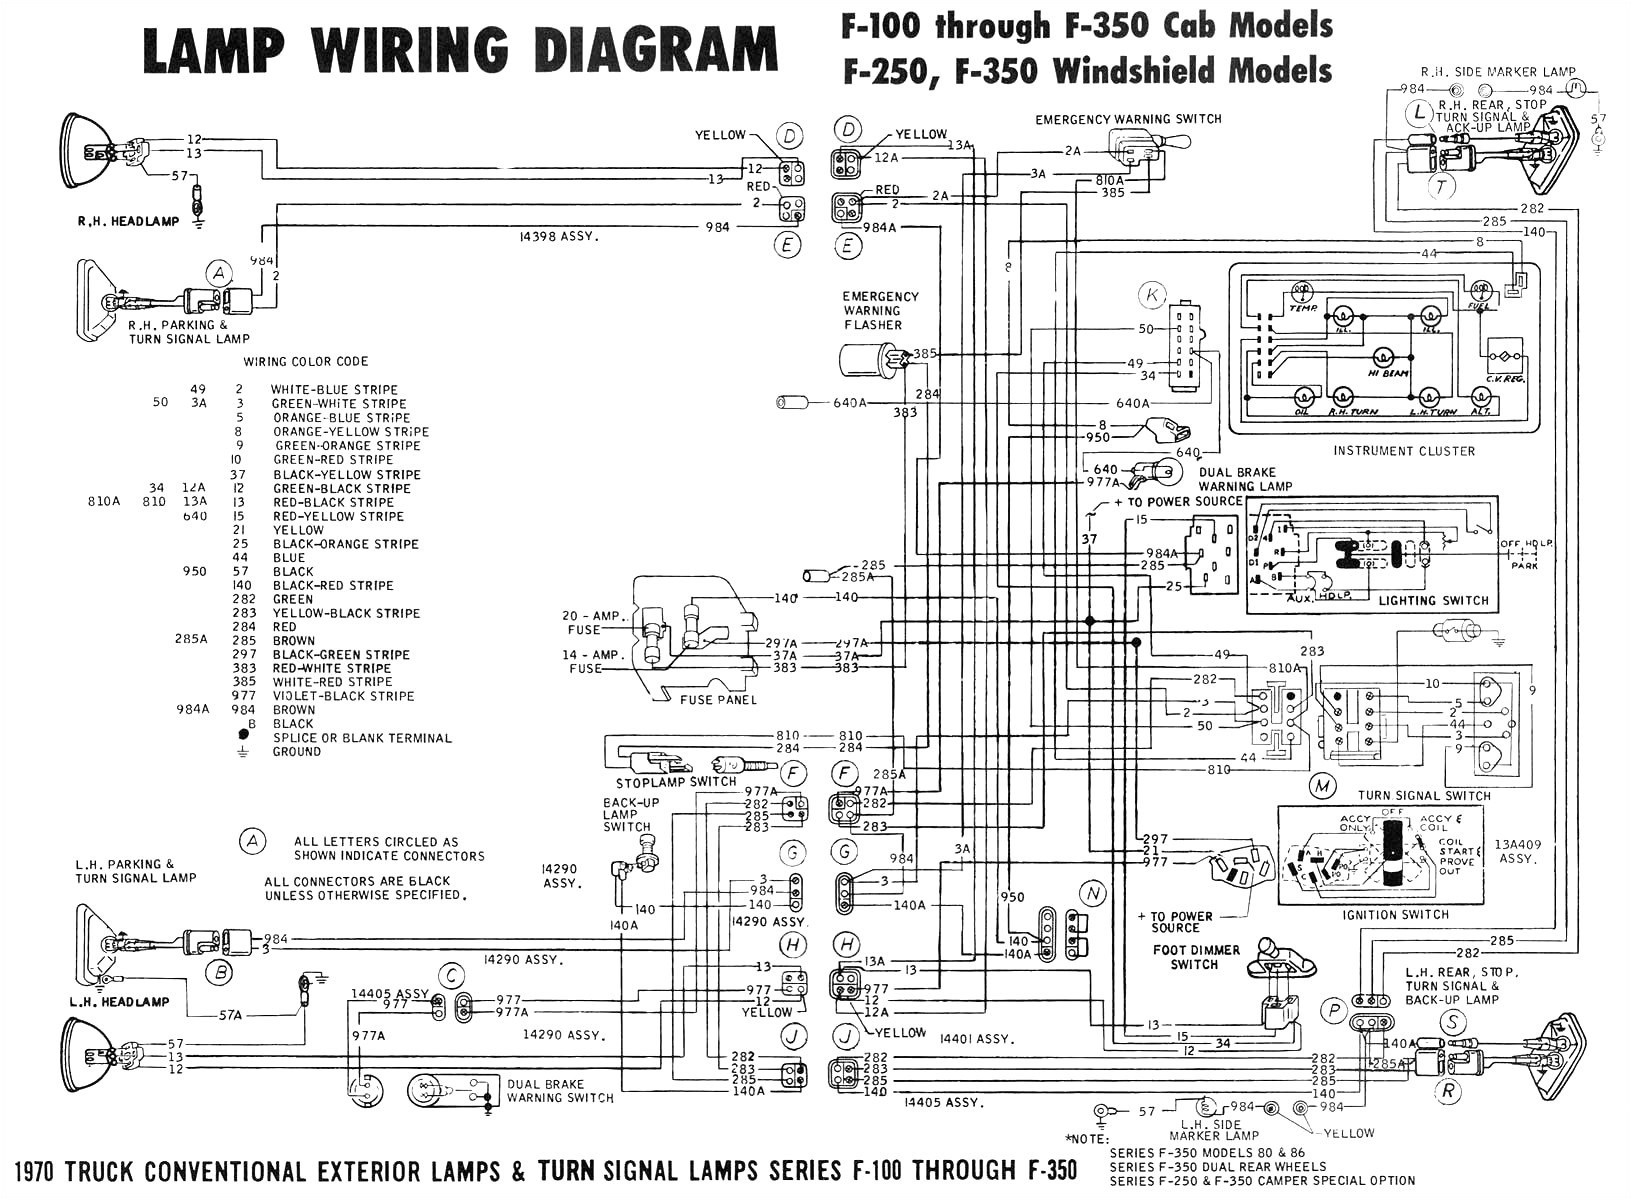 wiring diagram for ford f250 wiring diagram note 2002 f350 wiring diagram wiring diagram database wiring